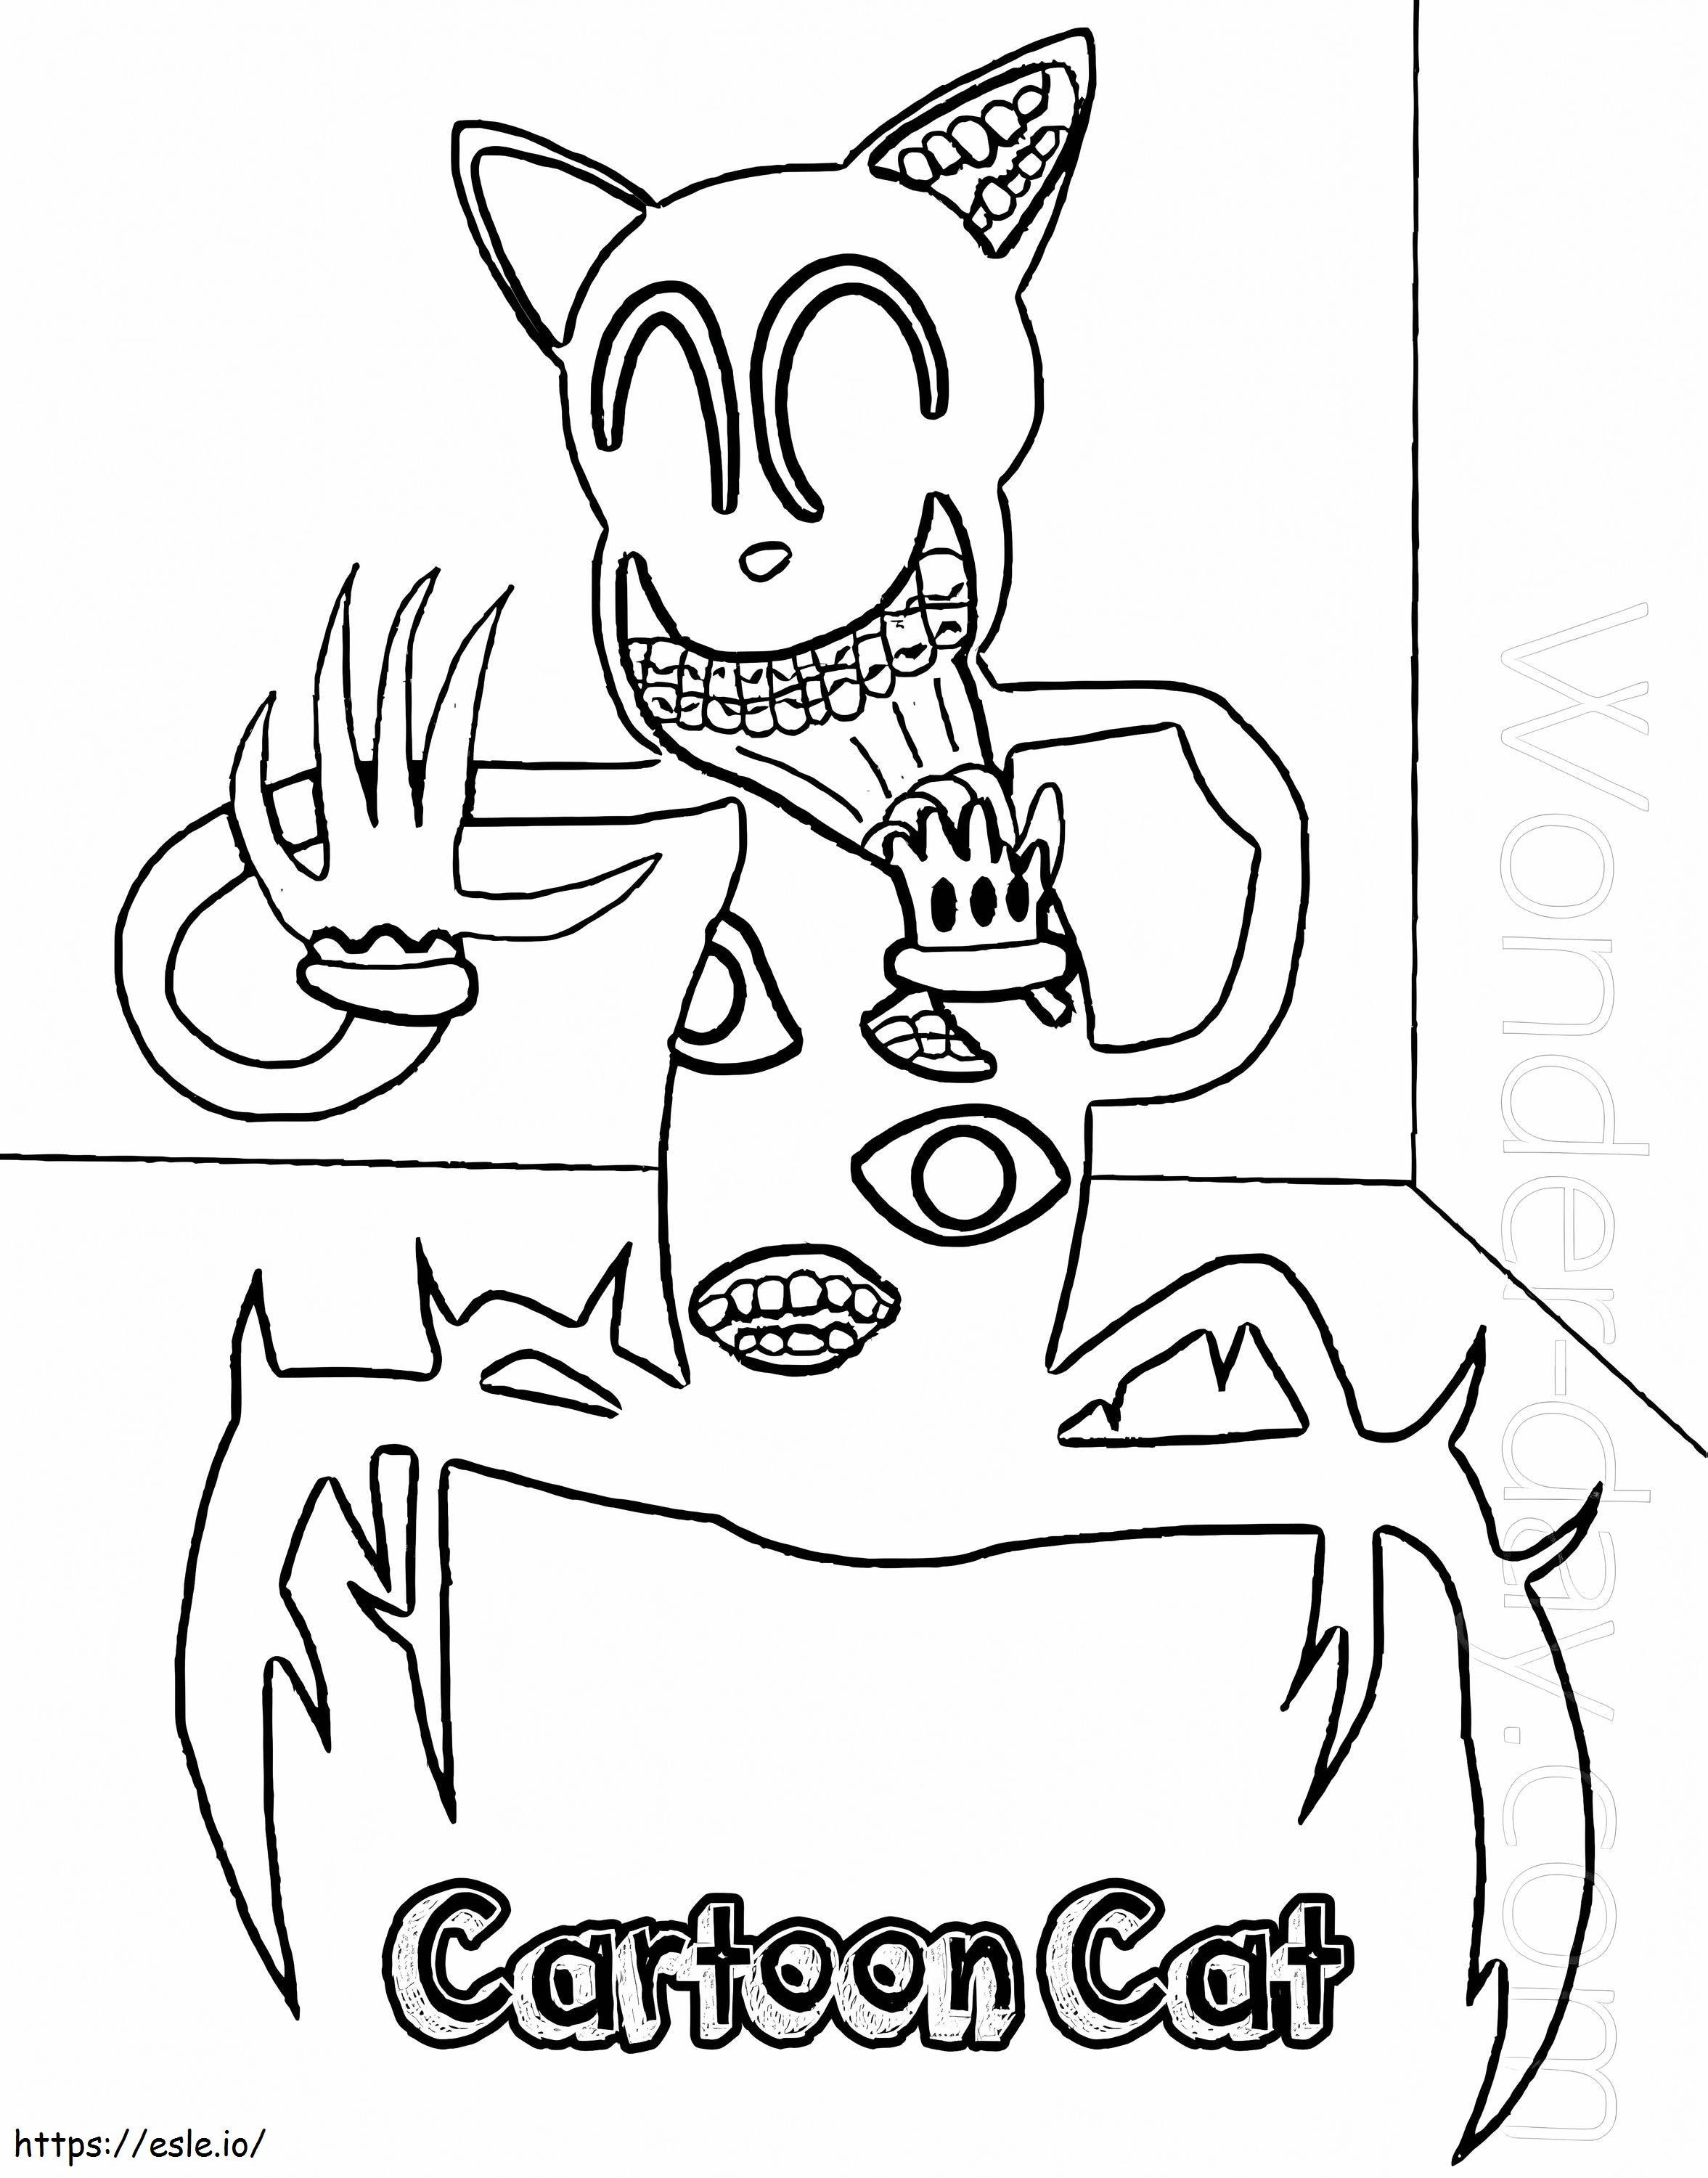 Cartoon Cat Printable coloring page